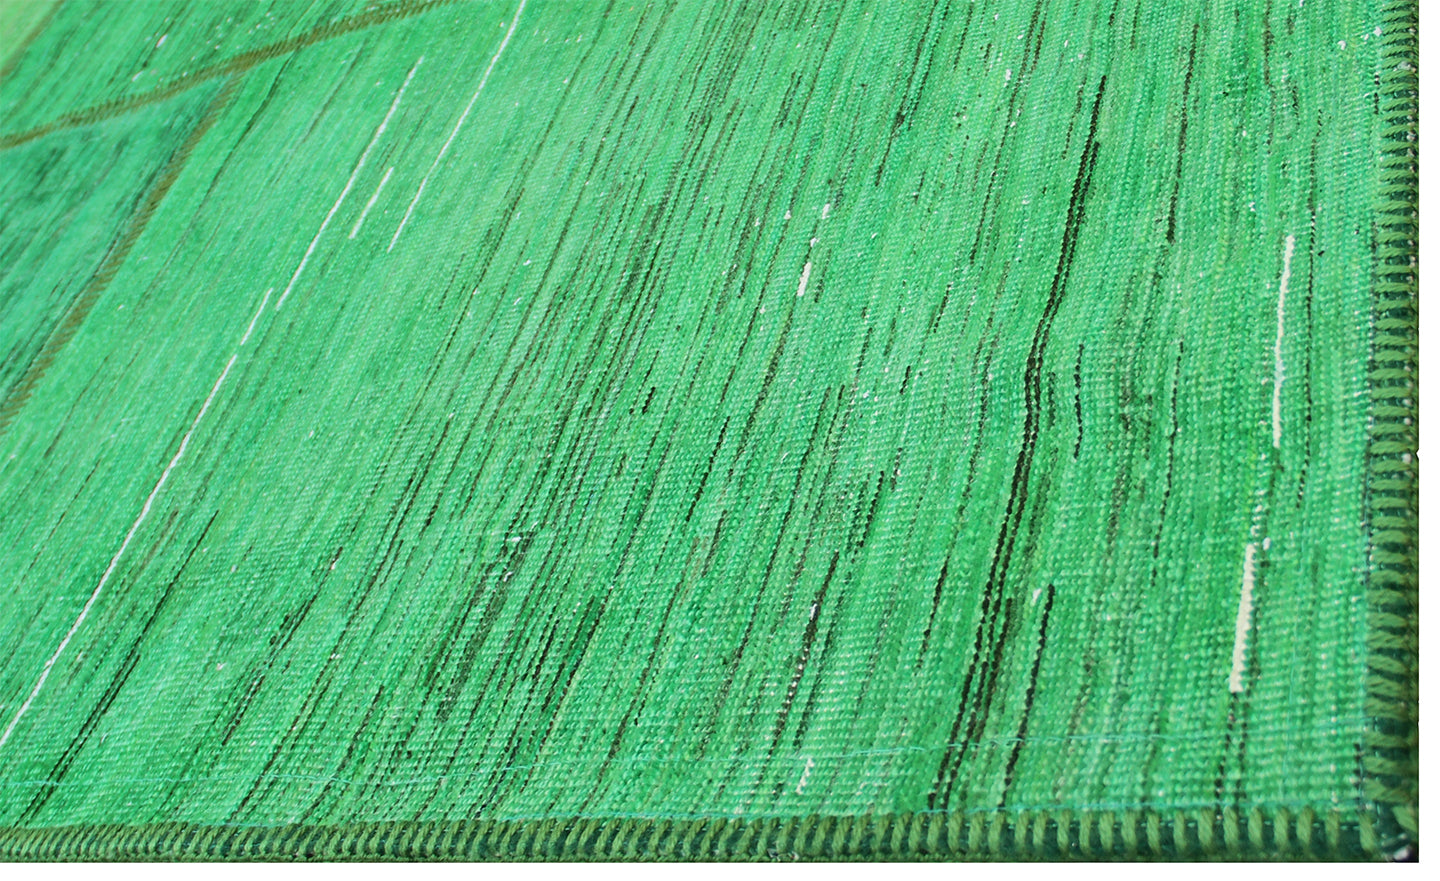 8'x10' Emerald Green Color Hand-Knotted Ariana Patchwork Overdyed Area Rug